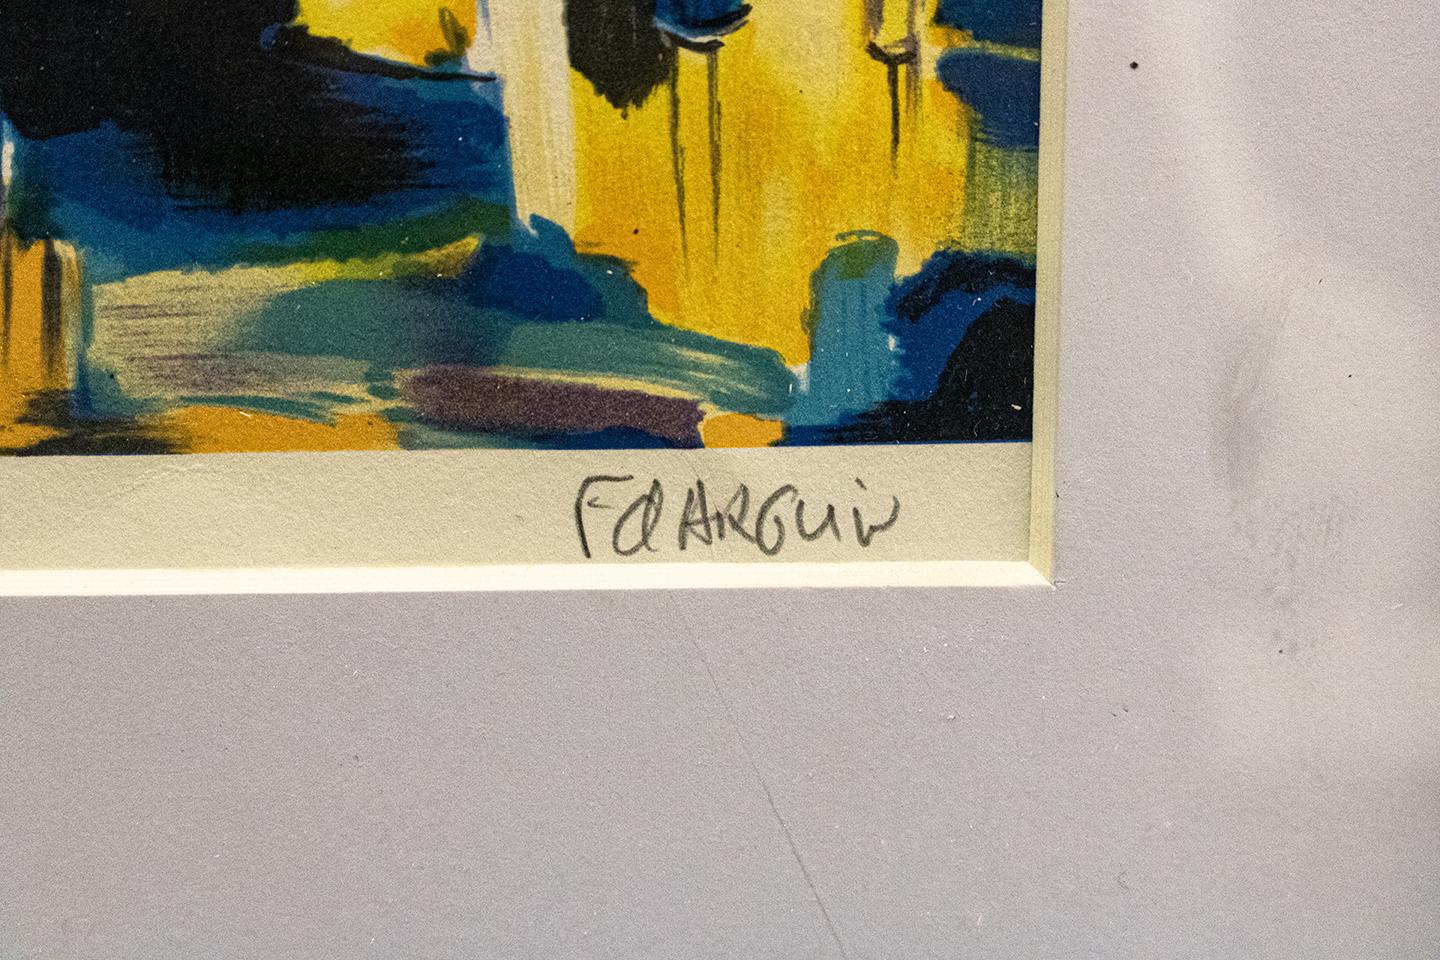 Limited Edition Lithograph By Francois D'arguin.
Signed By Artist.
Numbered 76/250.
Frame Measures 10 x 11 x 1 in.
Image Measures 4 x 6.5 in.
In Good Condition.